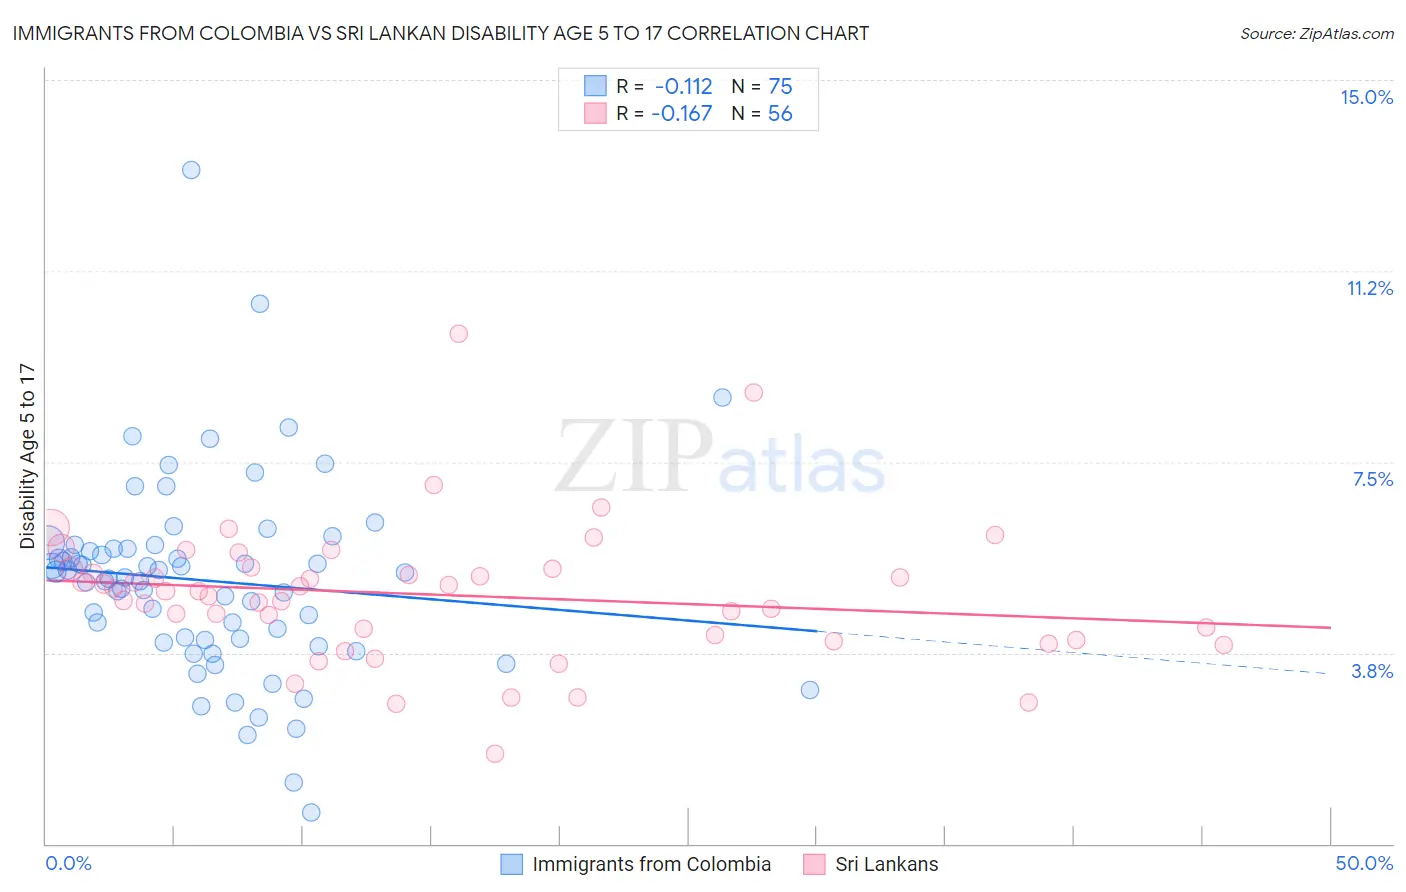 Immigrants from Colombia vs Sri Lankan Disability Age 5 to 17